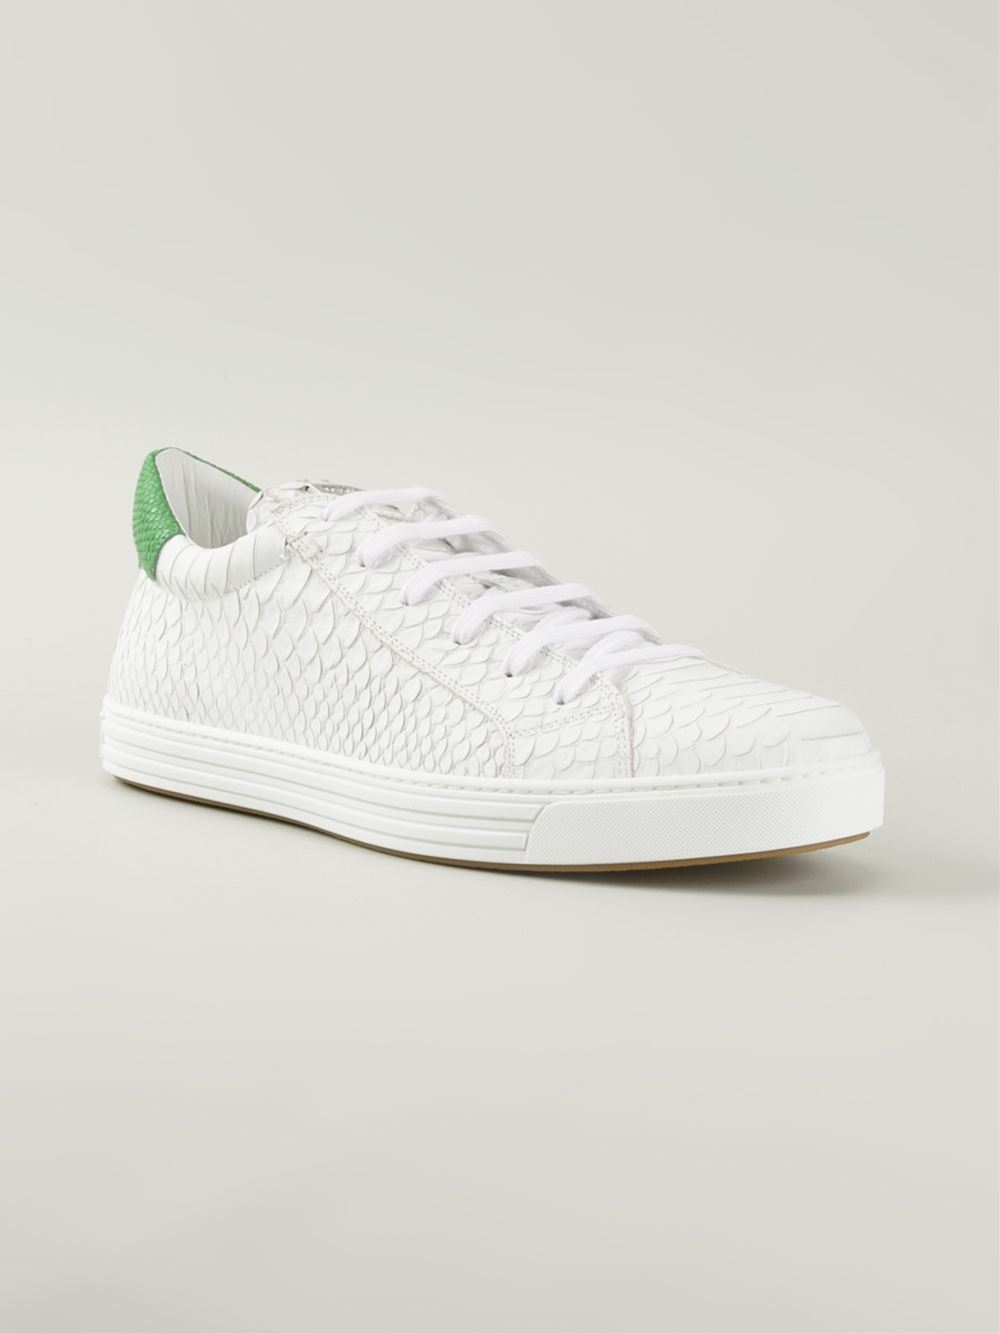 DSquared² Embossed Crocodile Effect Sneakers in White for Men - Lyst